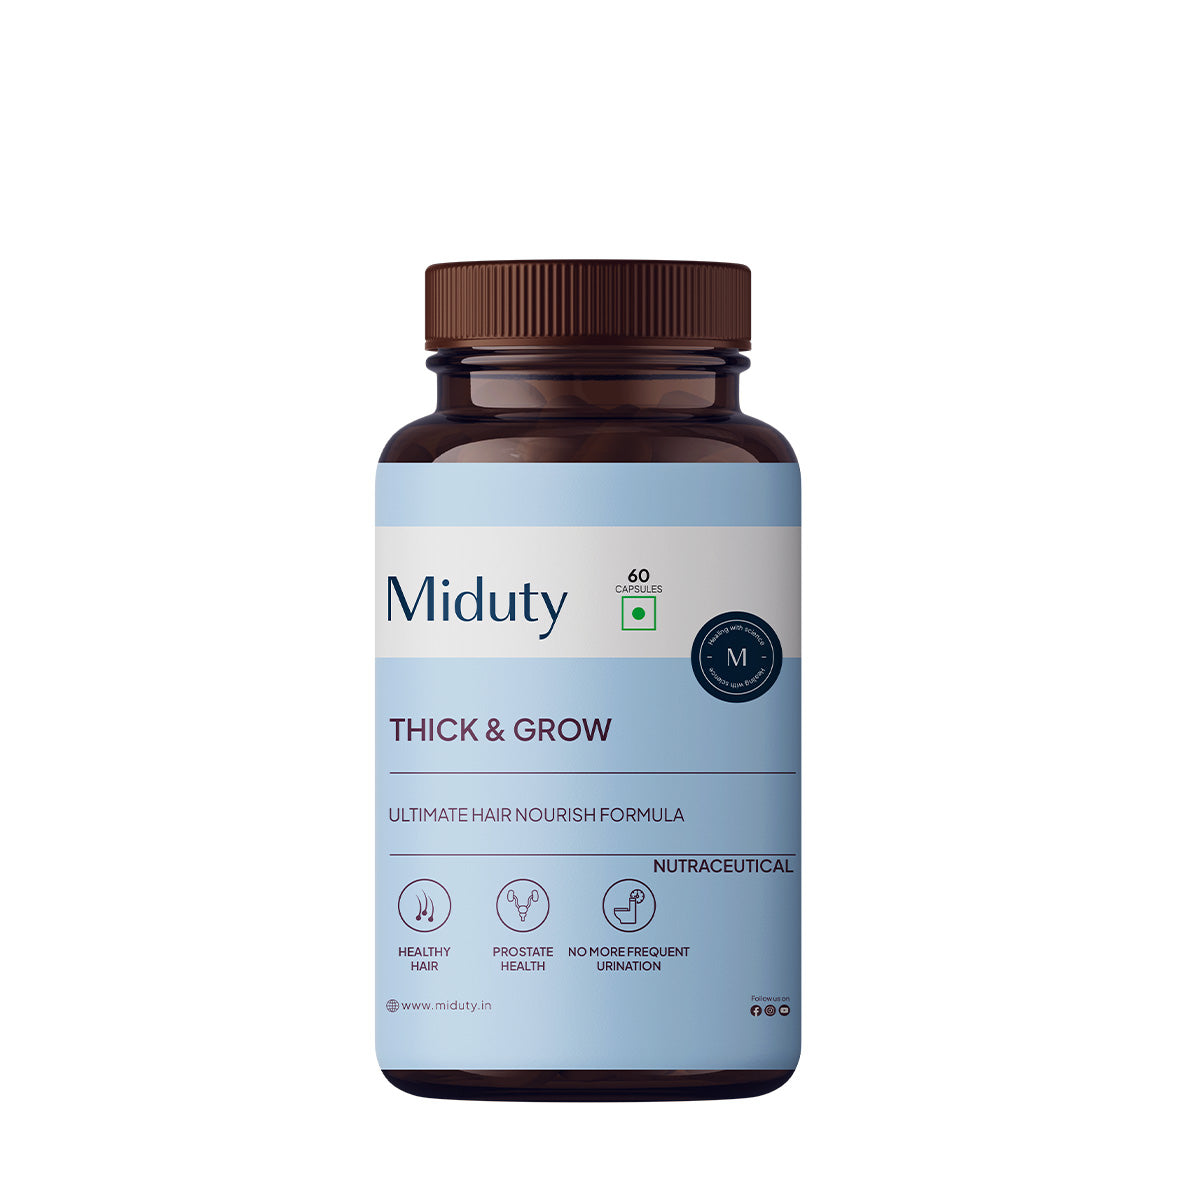 Miduty by Palak Notes Thick & Grow Capsules - BUDNE